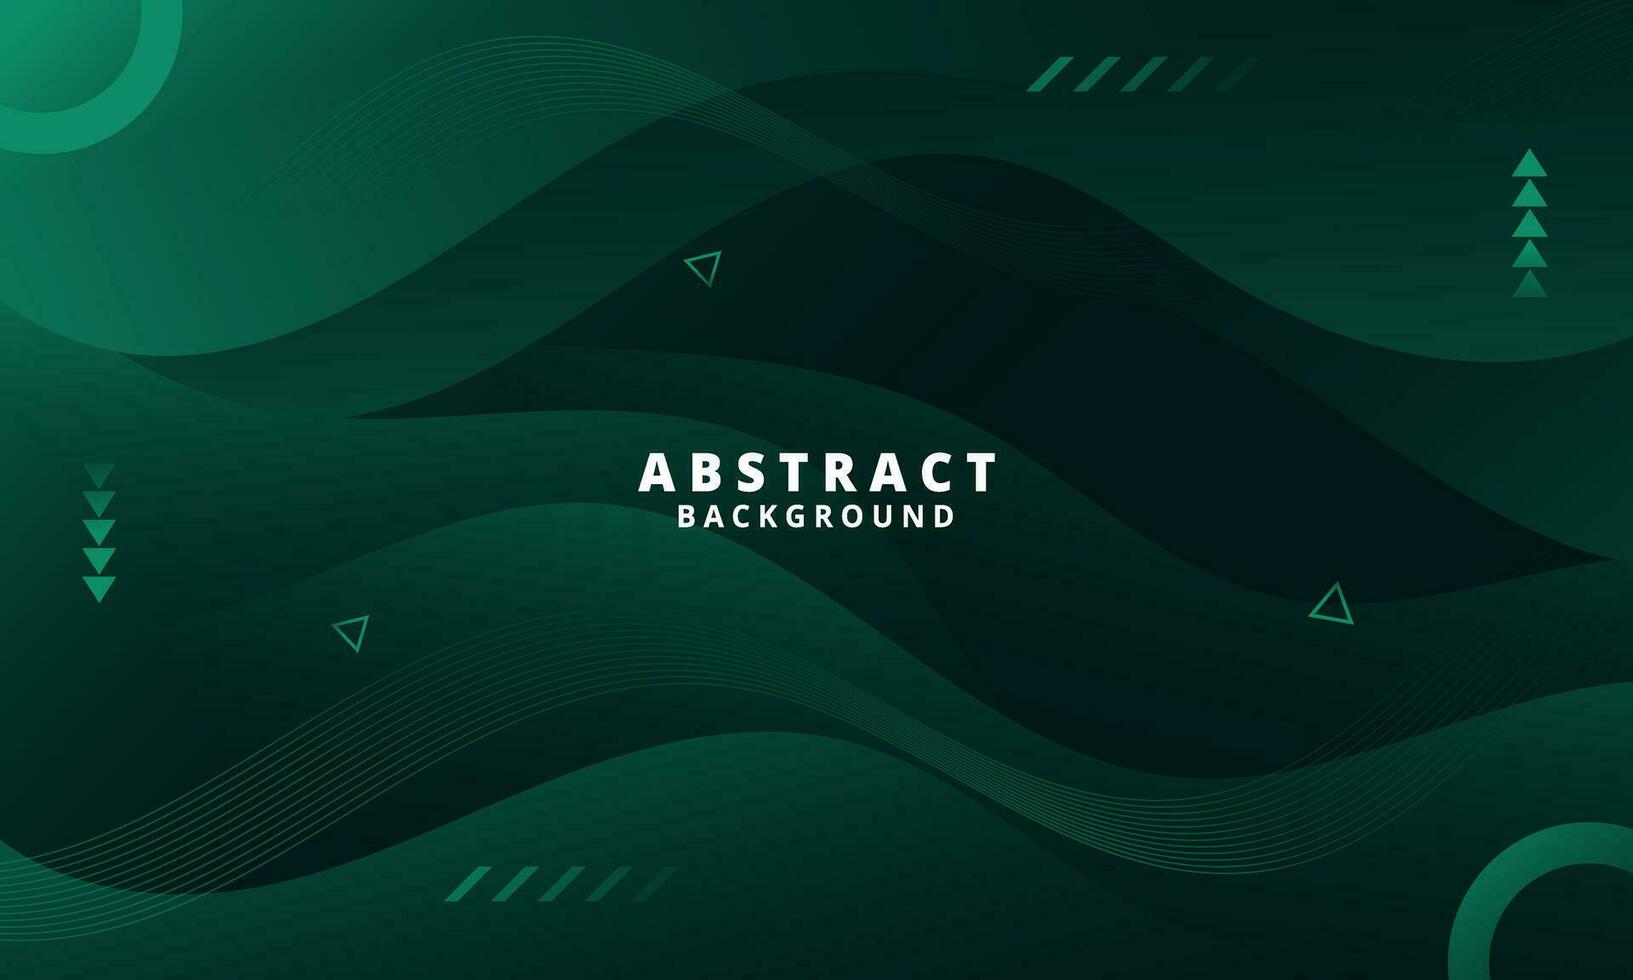 Abstract Dark Green Background with Wavy Shapes. flowing and curvy shapes. This asset is suitable for website backgrounds, flyers, posters, and digital art projects. vector